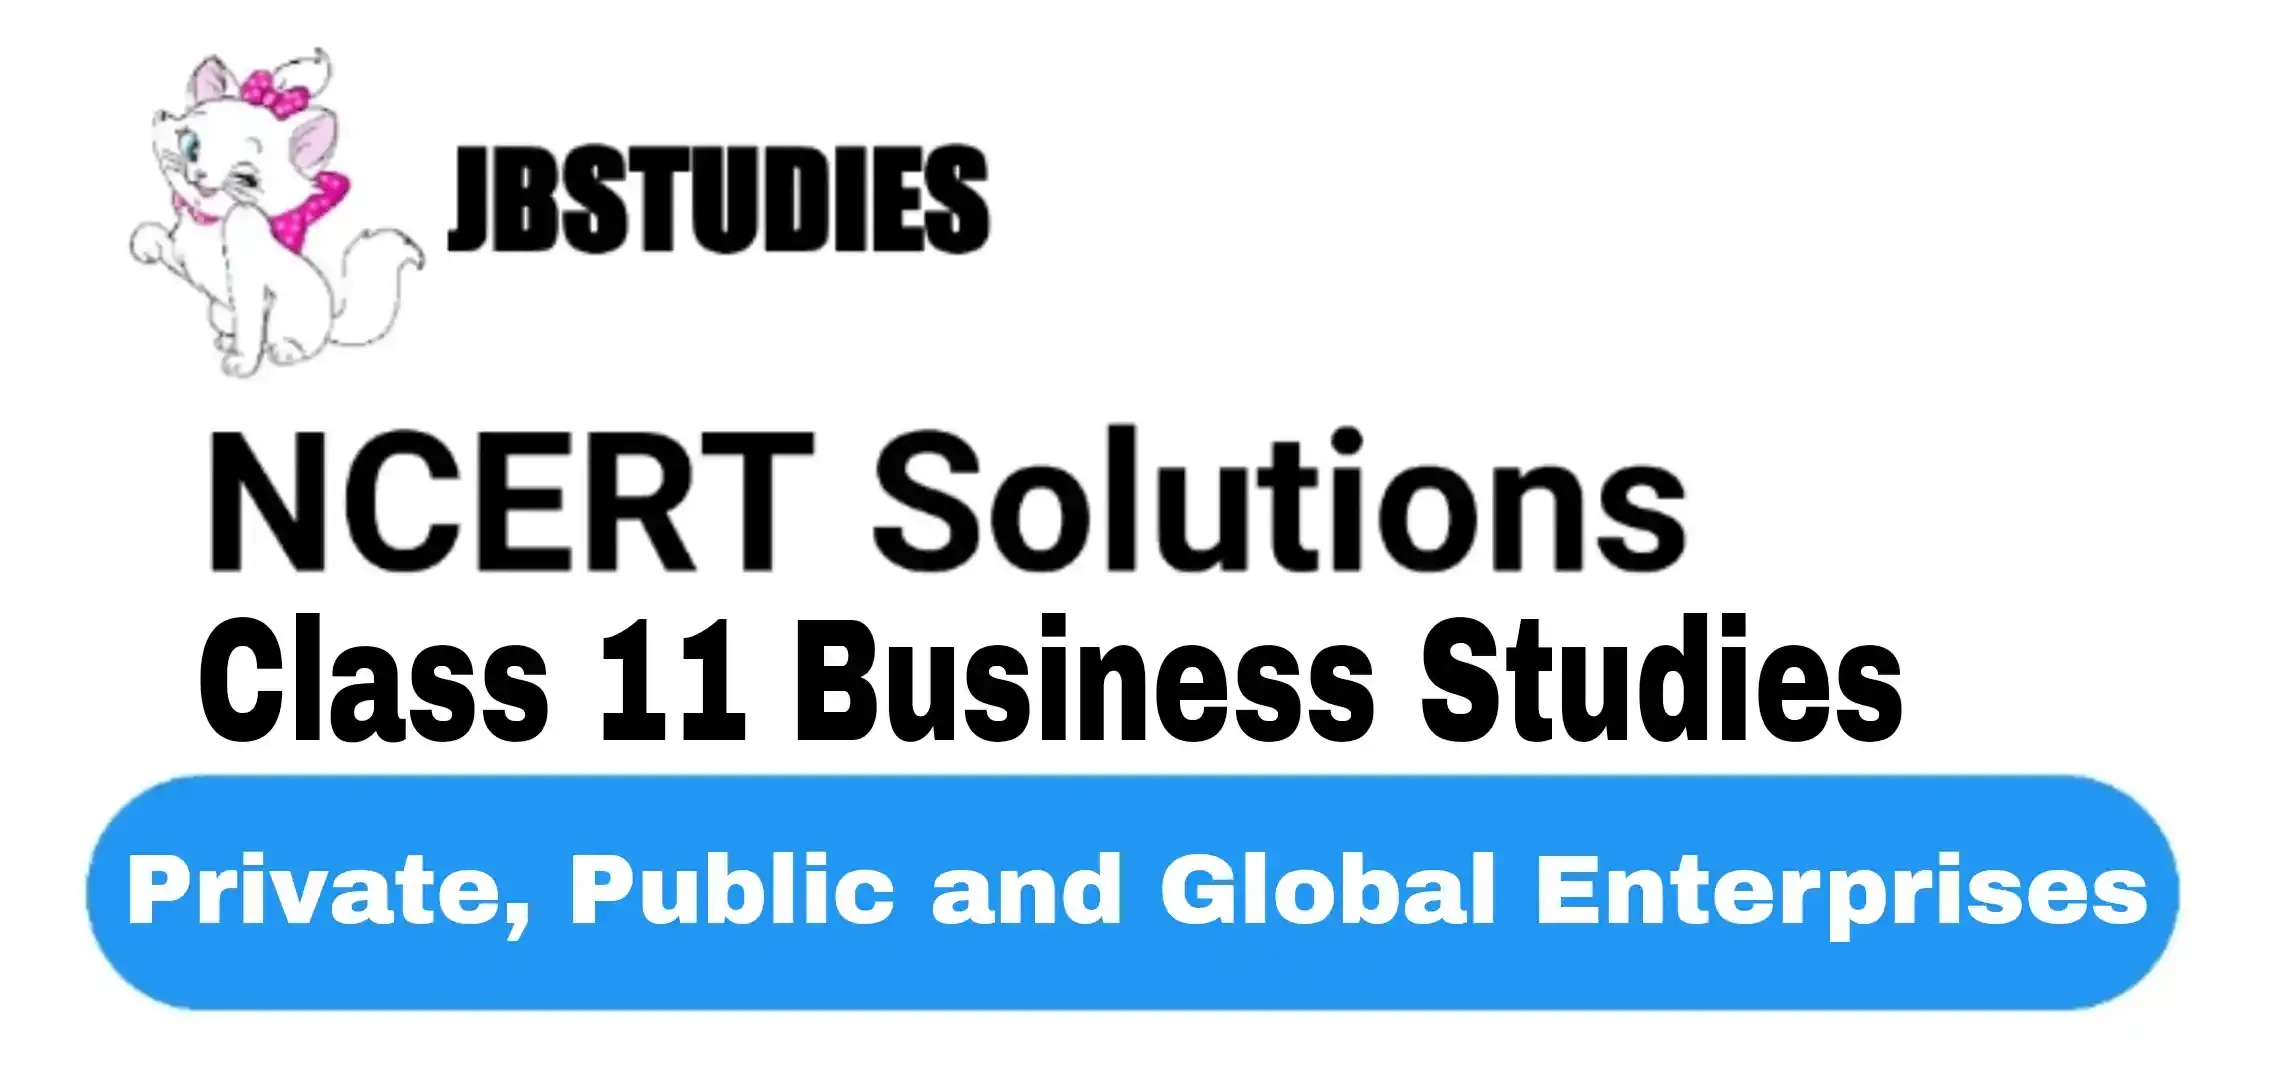 Solutions Class 11 Business Studies Chapter -3 (Private, Public and Global Enterprises)